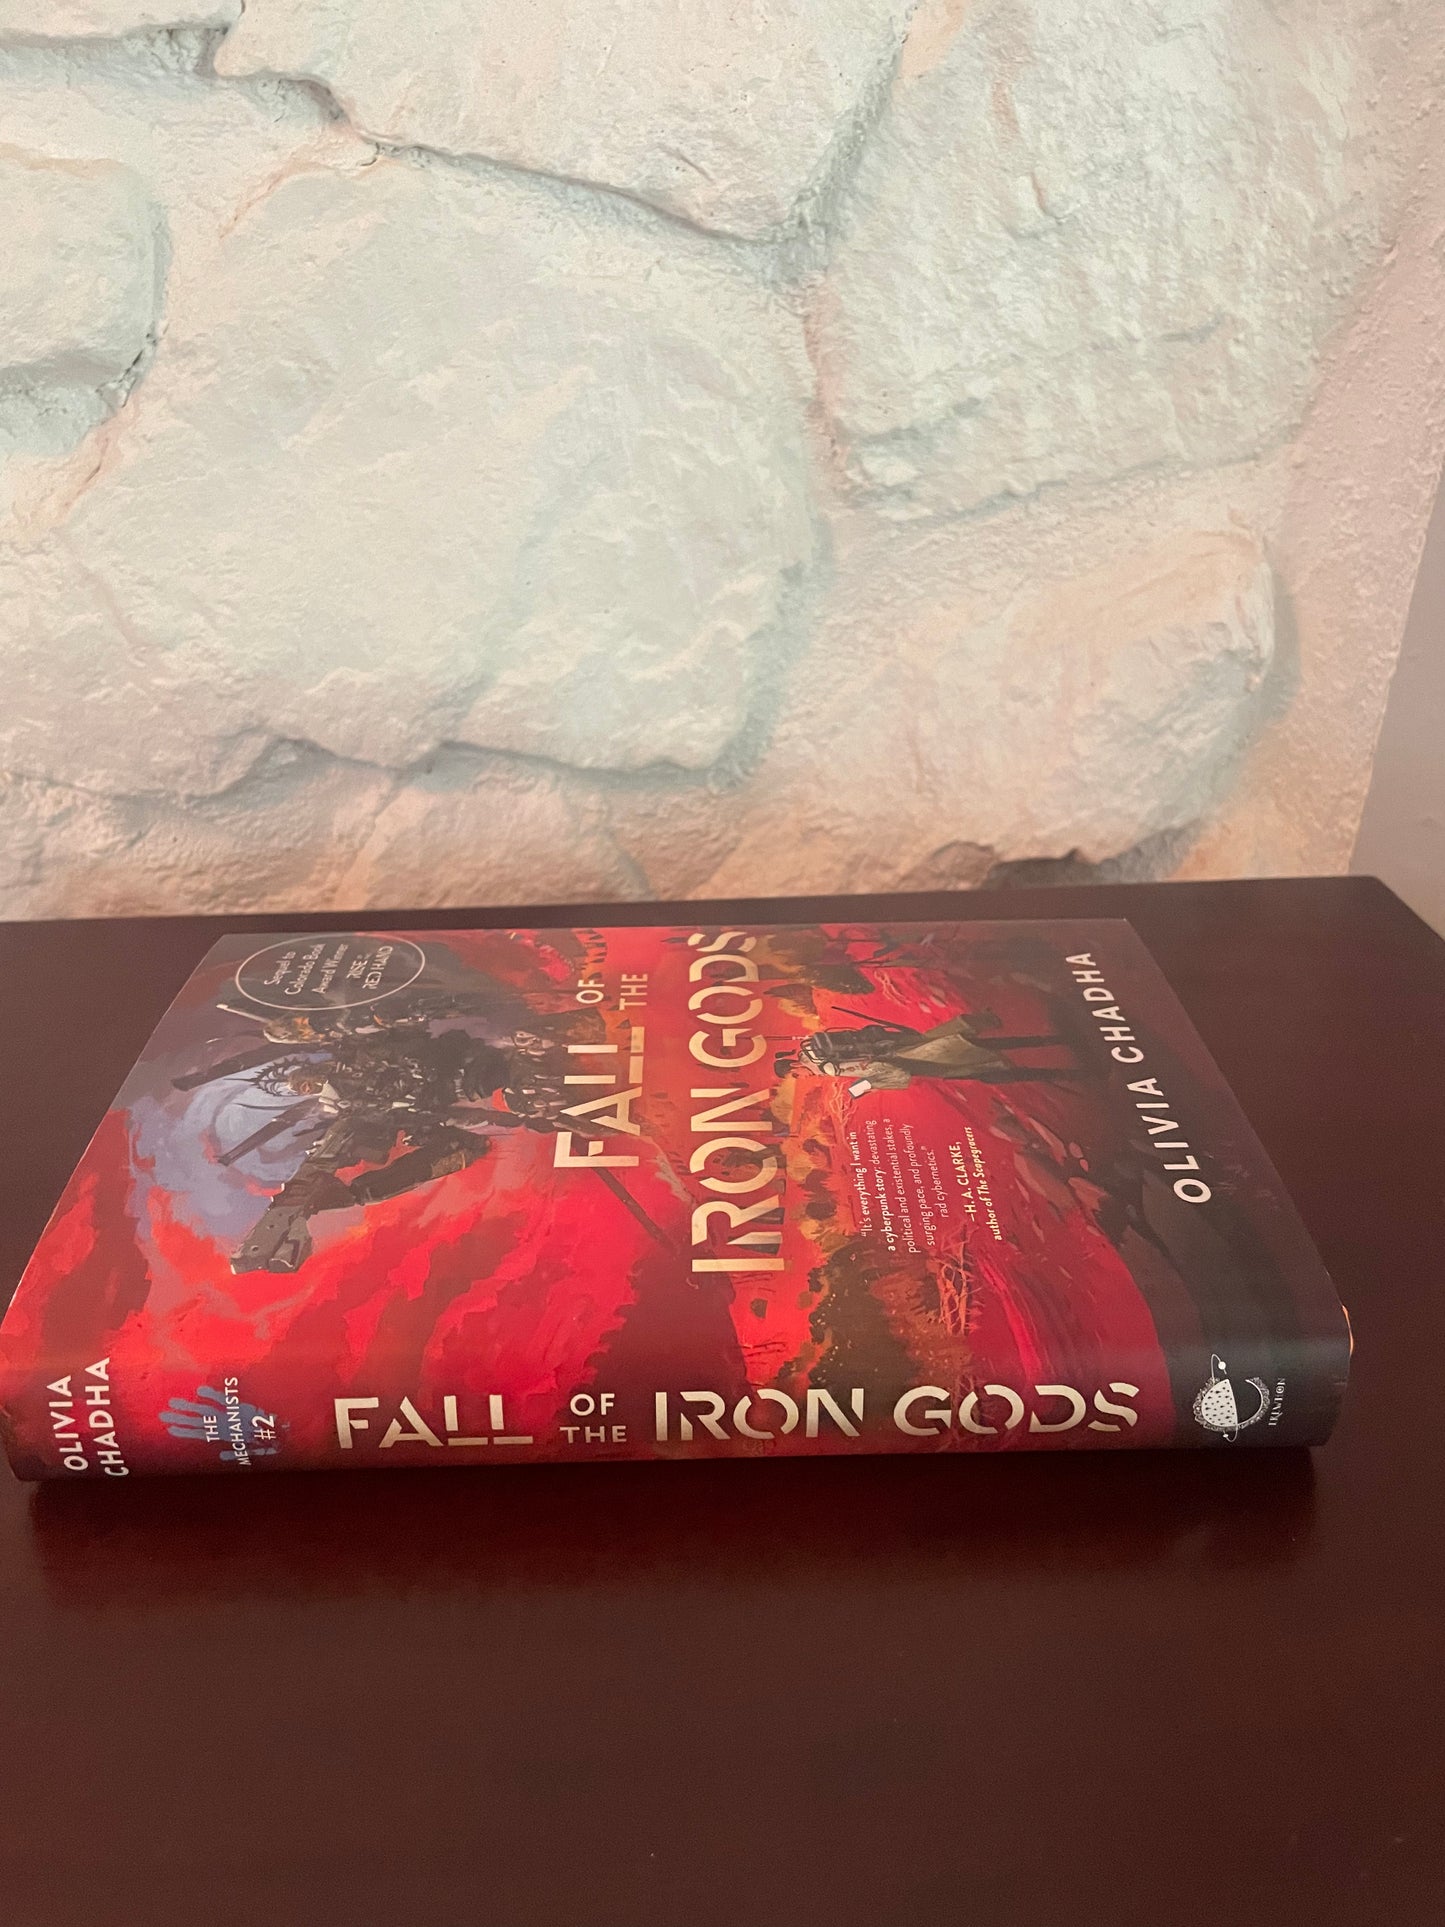 Fall of the Iron Gods (The Mechanists) - Olivia Chadha